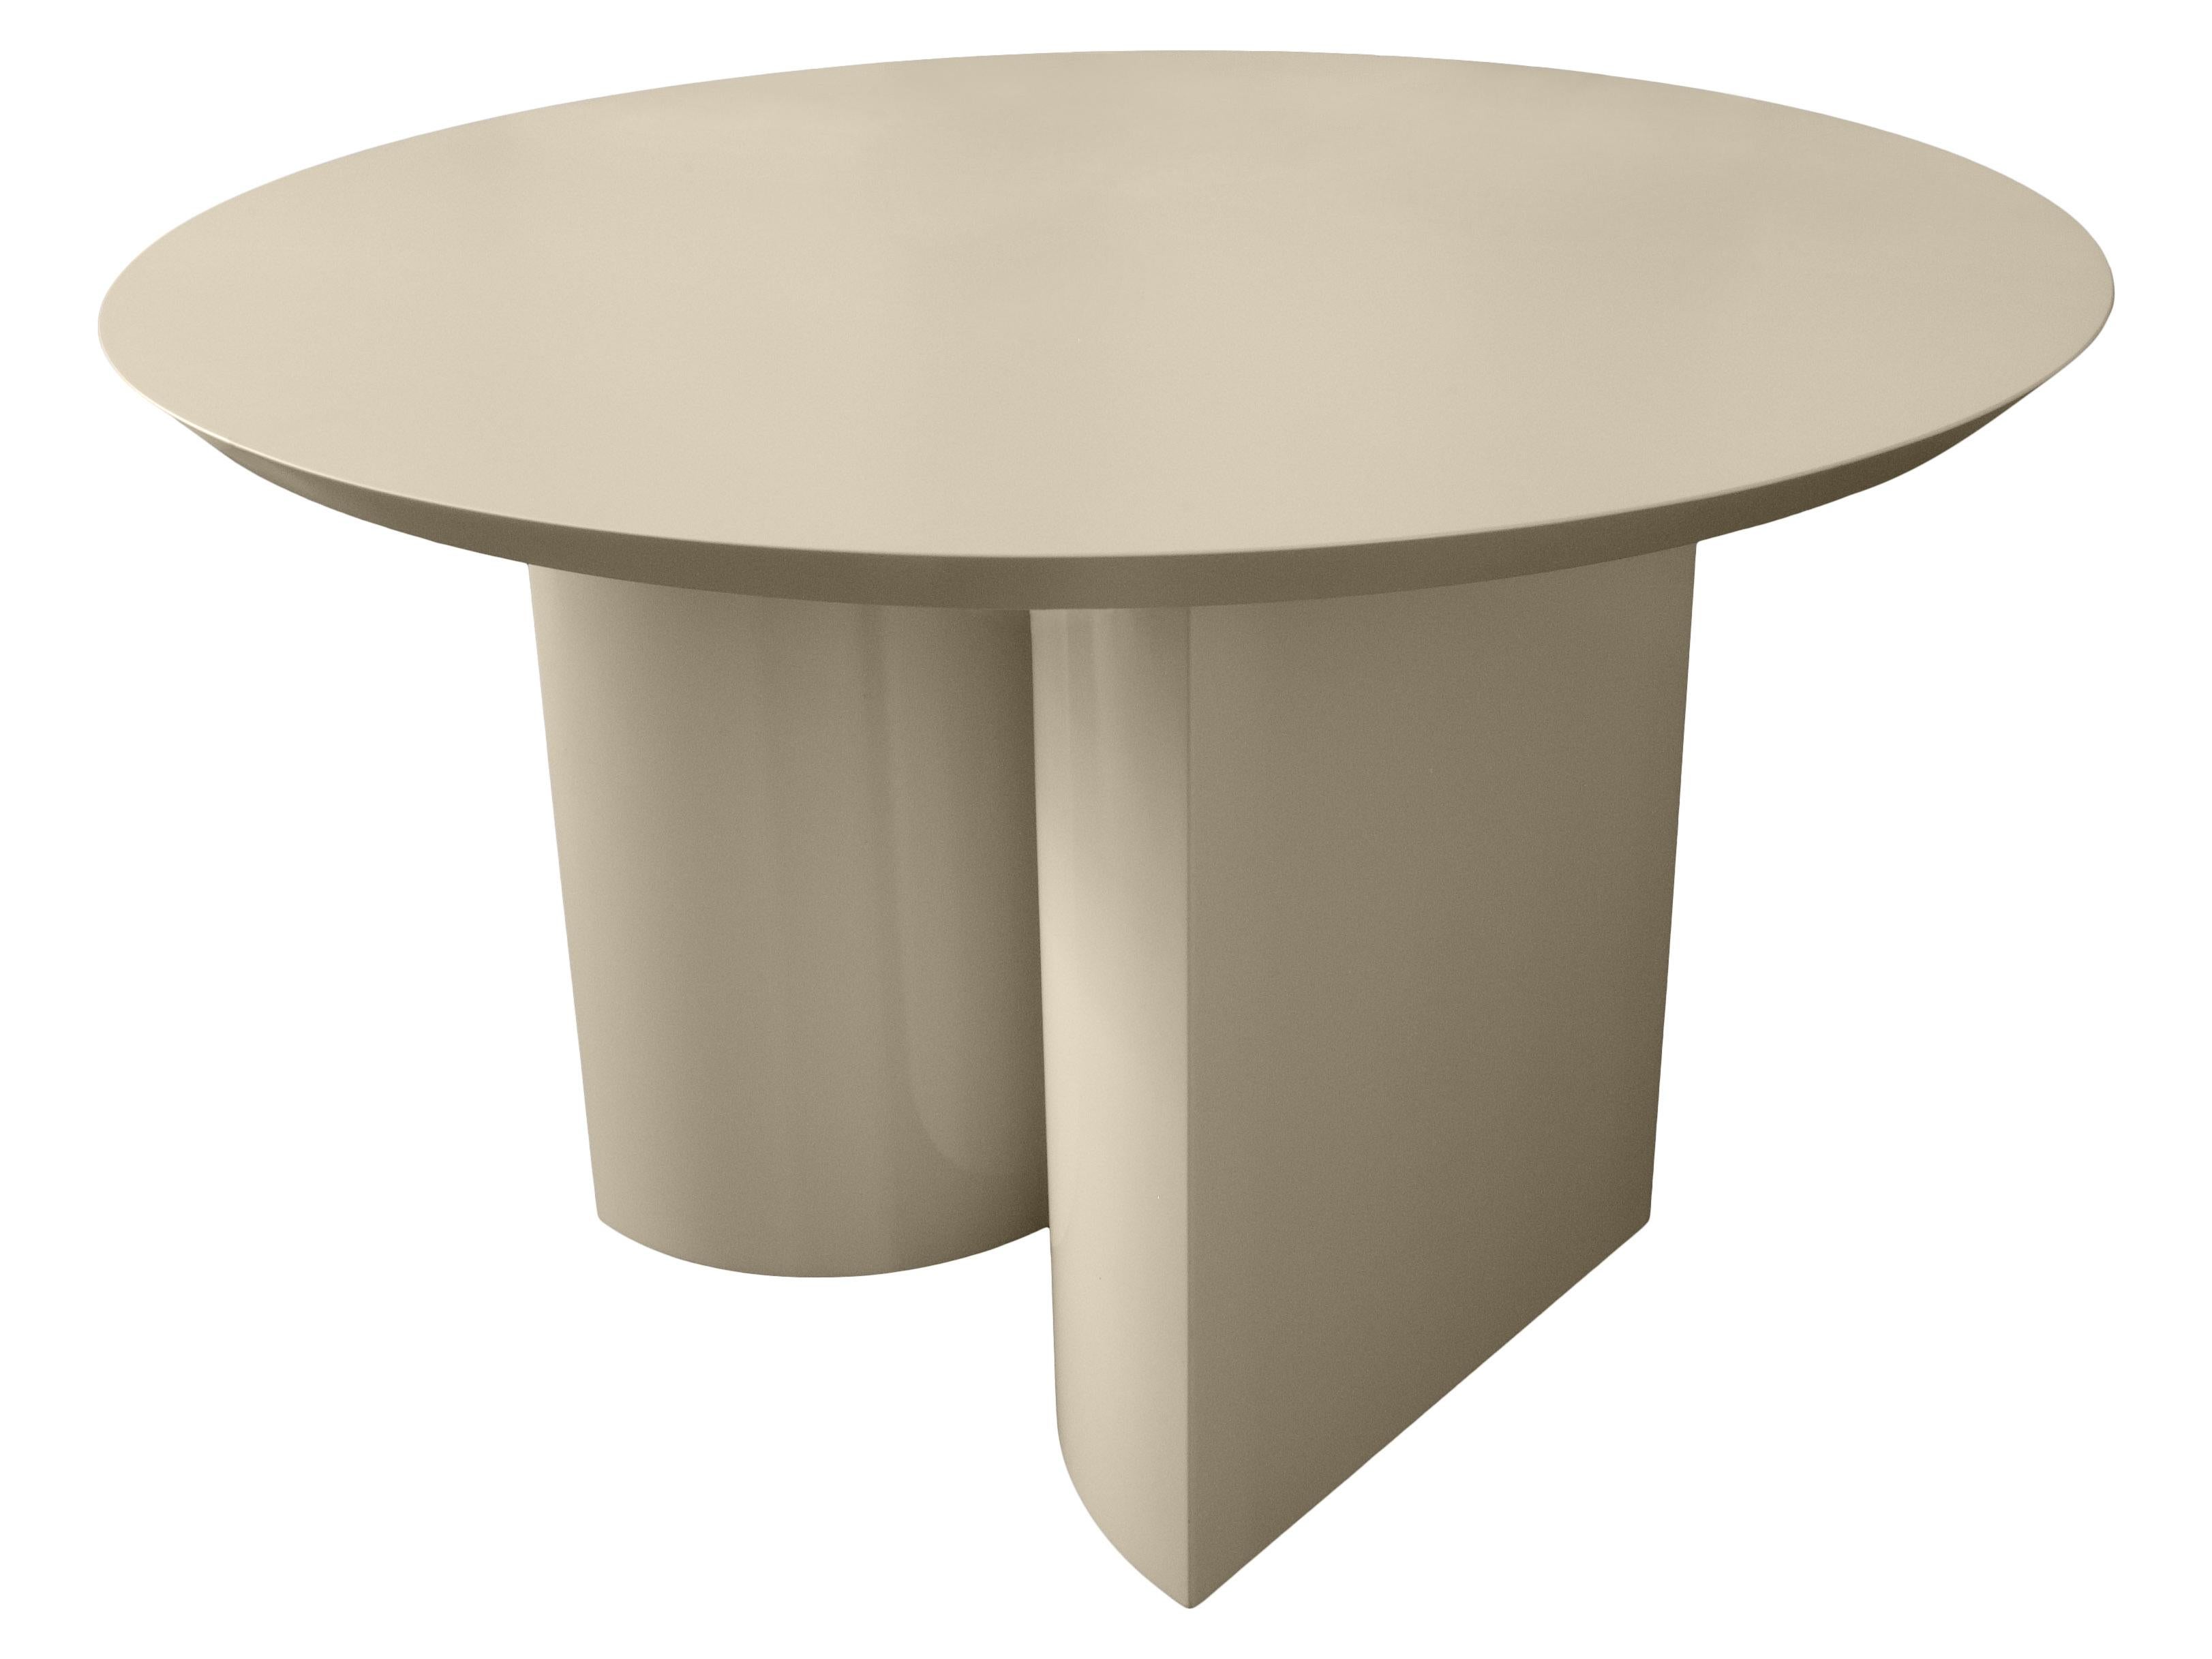 Contemporary Round Split Circle Leg Dining Kitchen Table For Sale